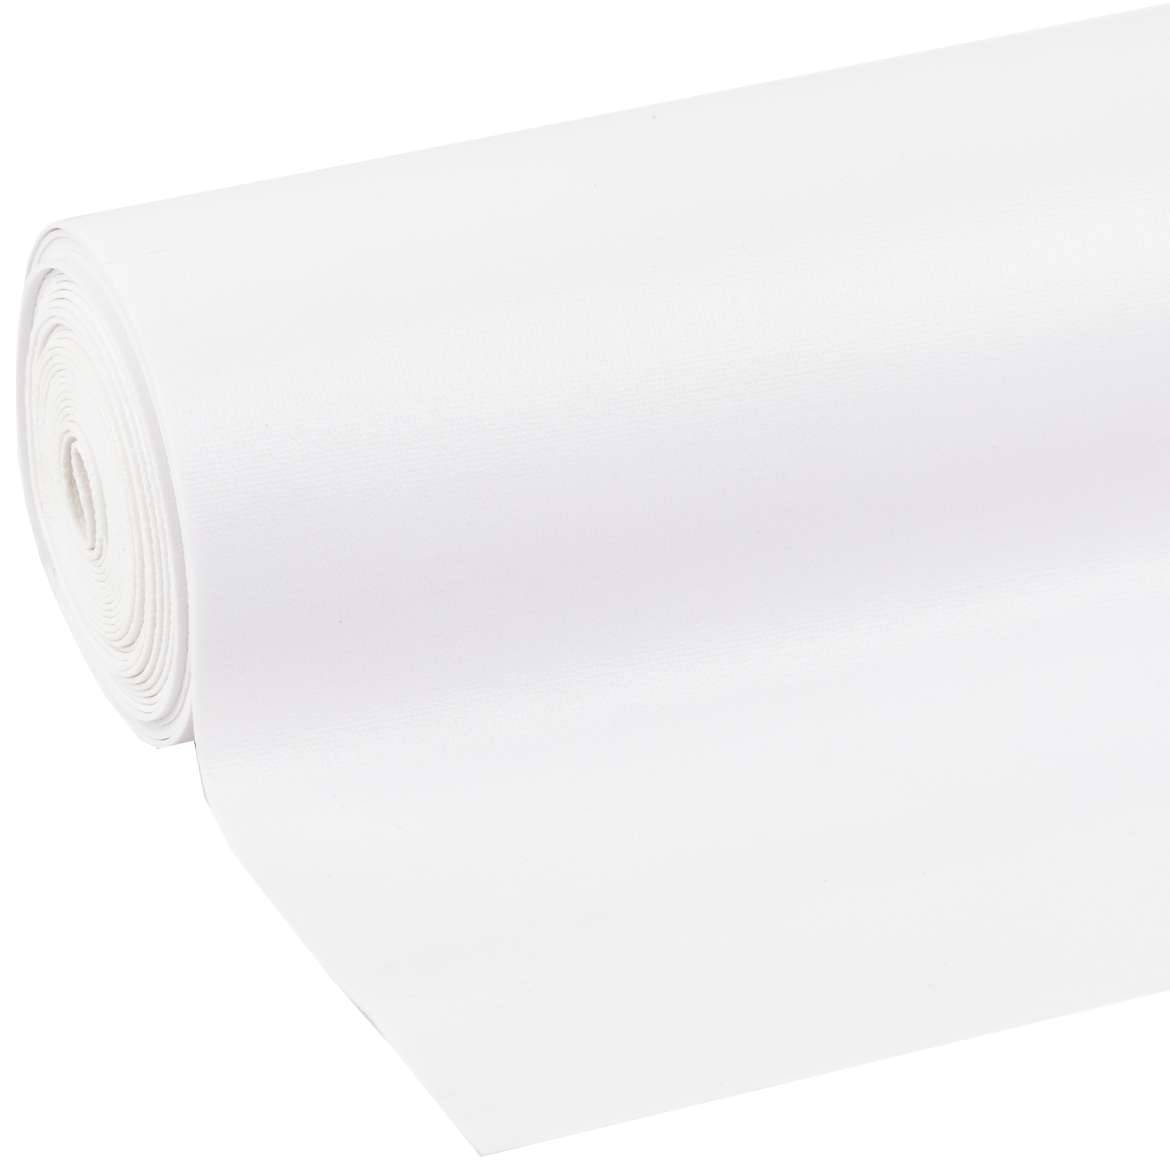 Solid Grip Shelf Liner with Clorox®